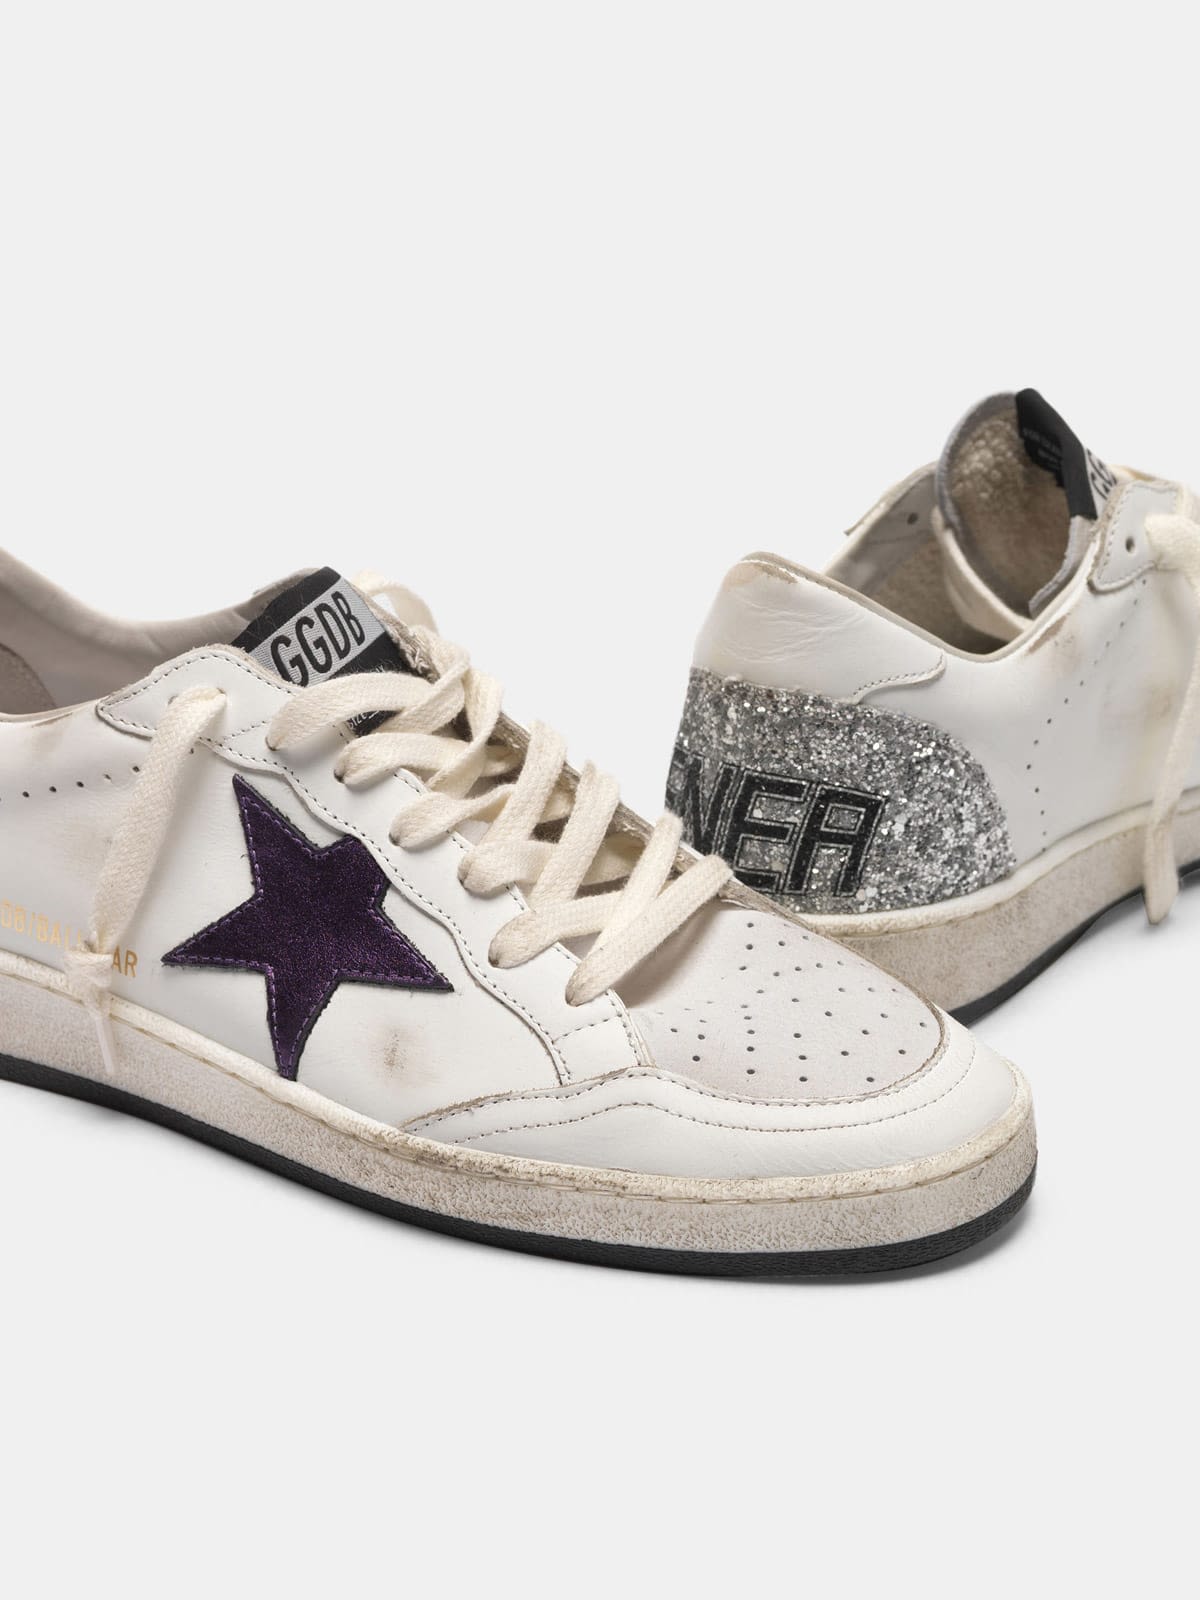 Ball Star sneakers with metallic purple star and glitter back